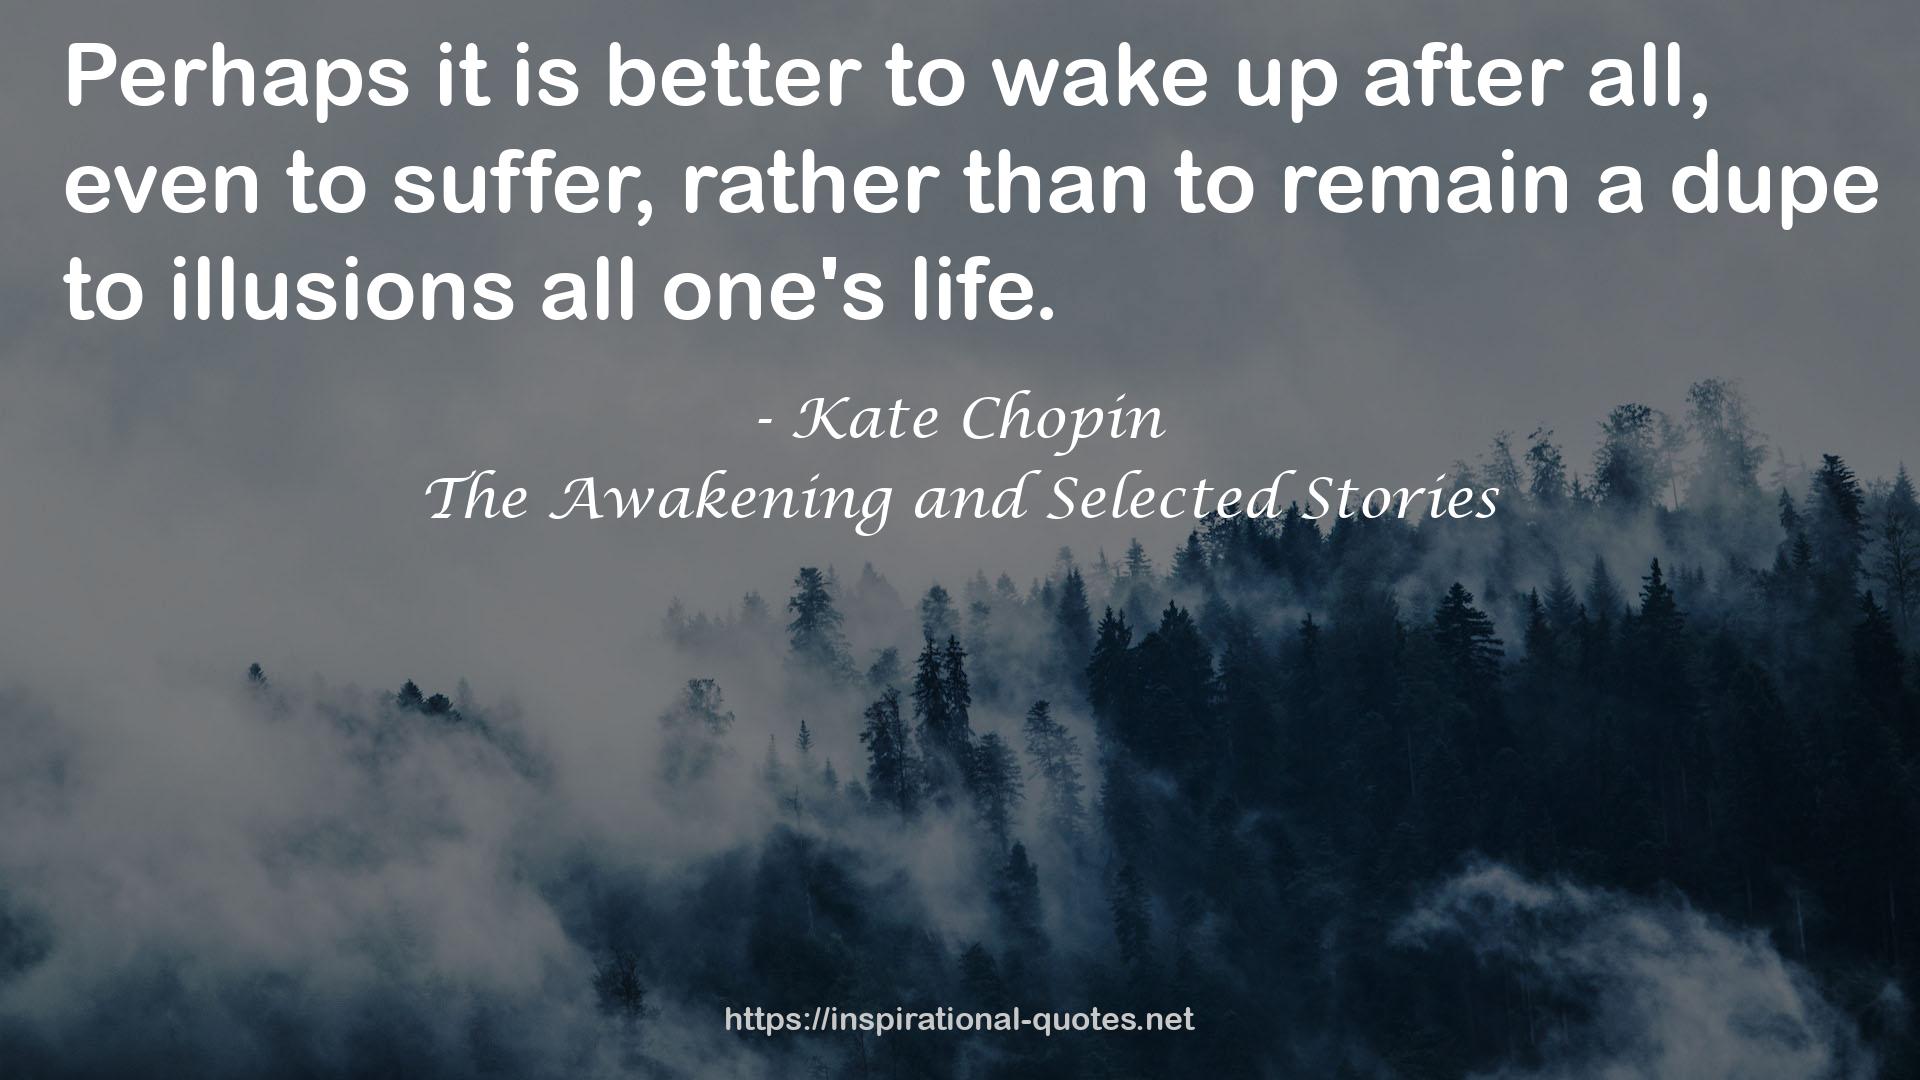 The Awakening and Selected Stories QUOTES